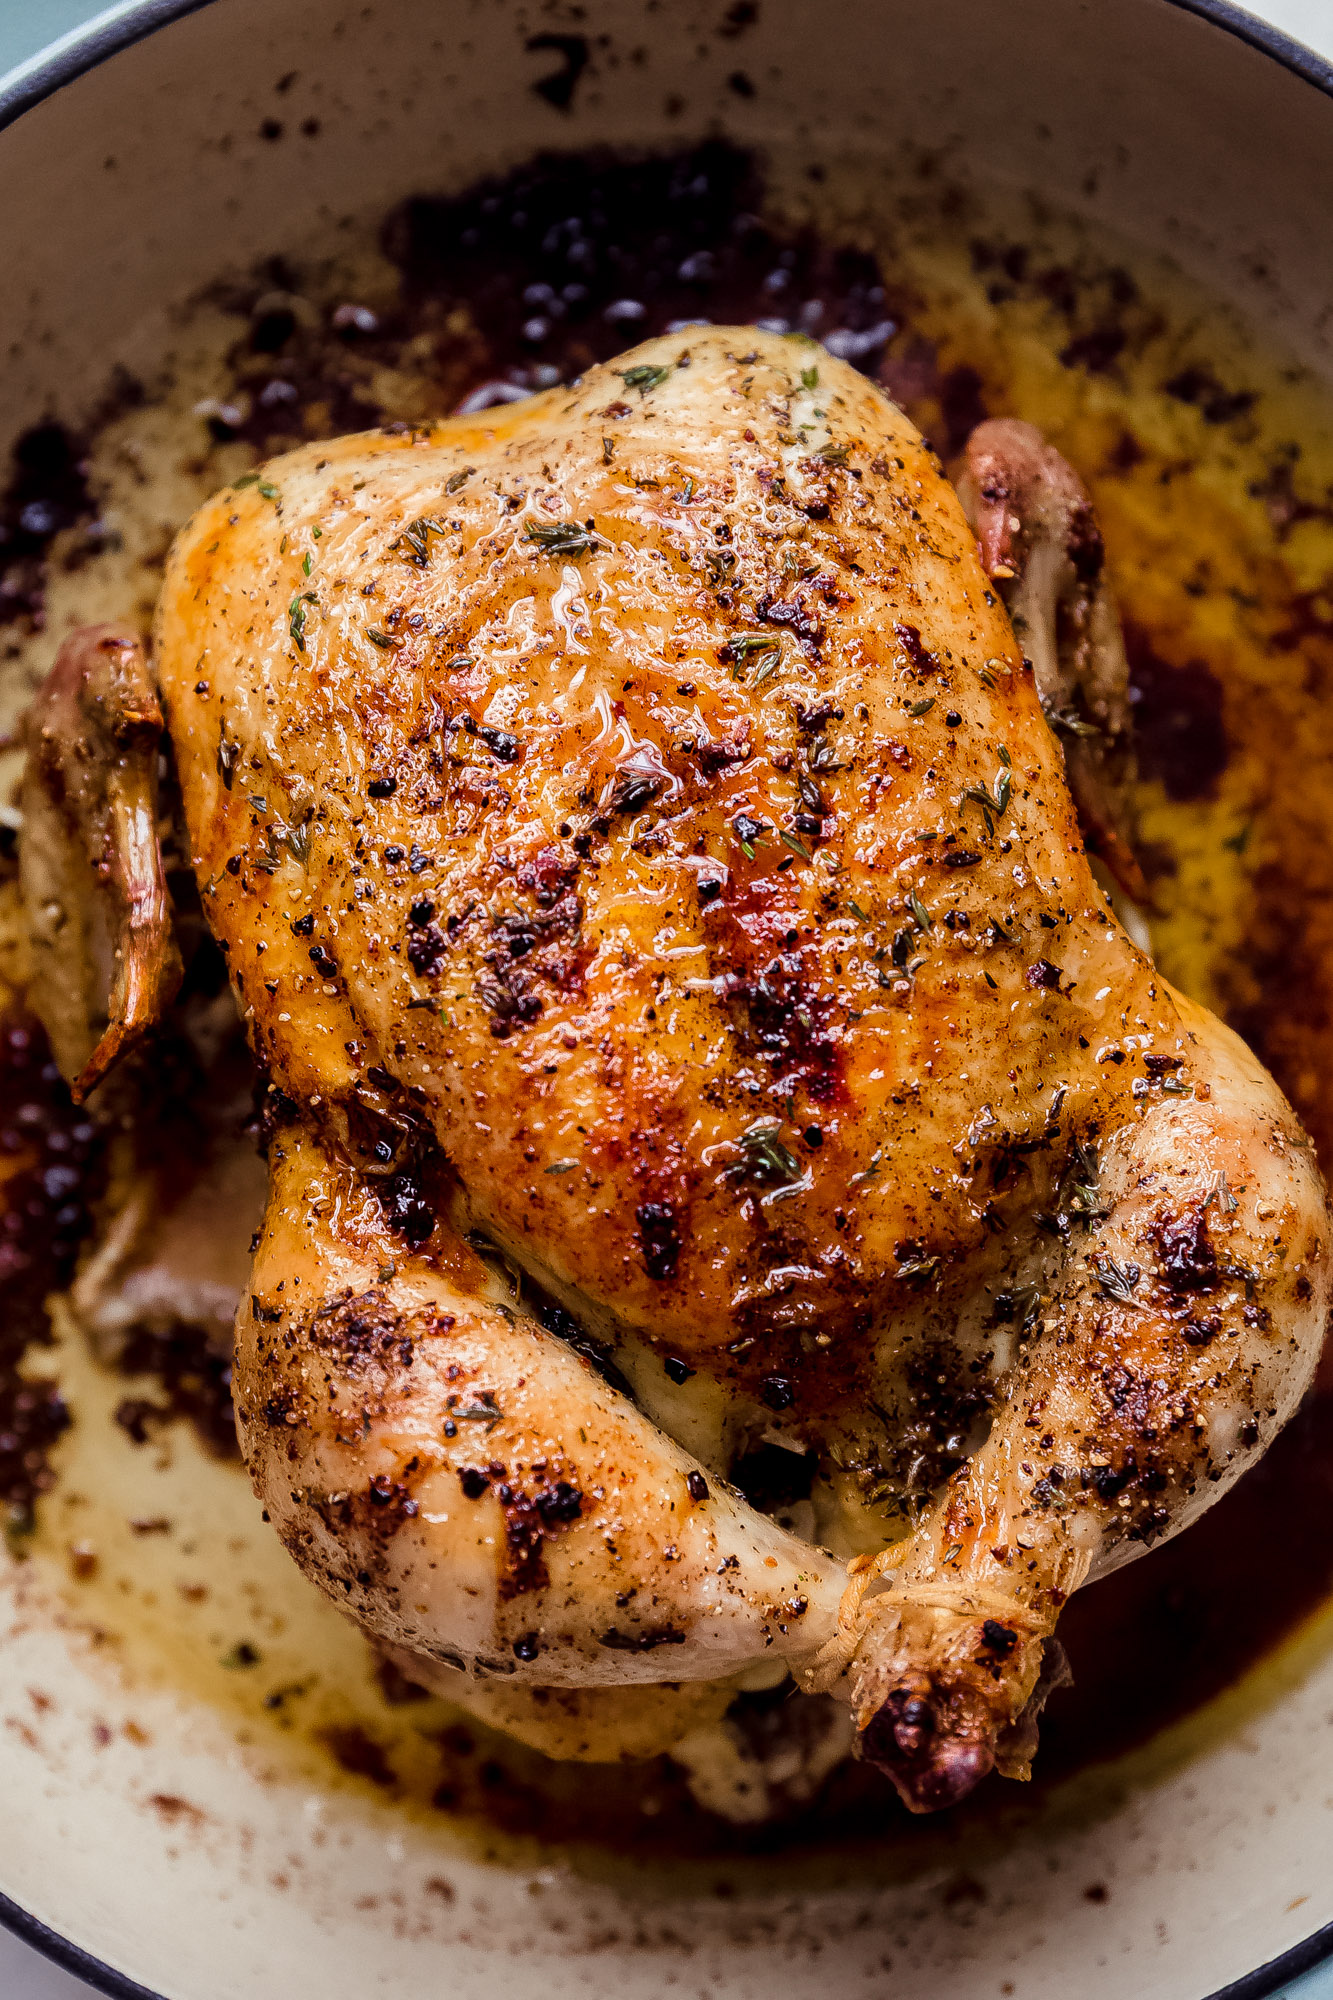 https://littlespicejar.com/wp-content/uploads/2014/12/Perfect-One-Hour-Whole-Roasted-Chicken-9.jpg